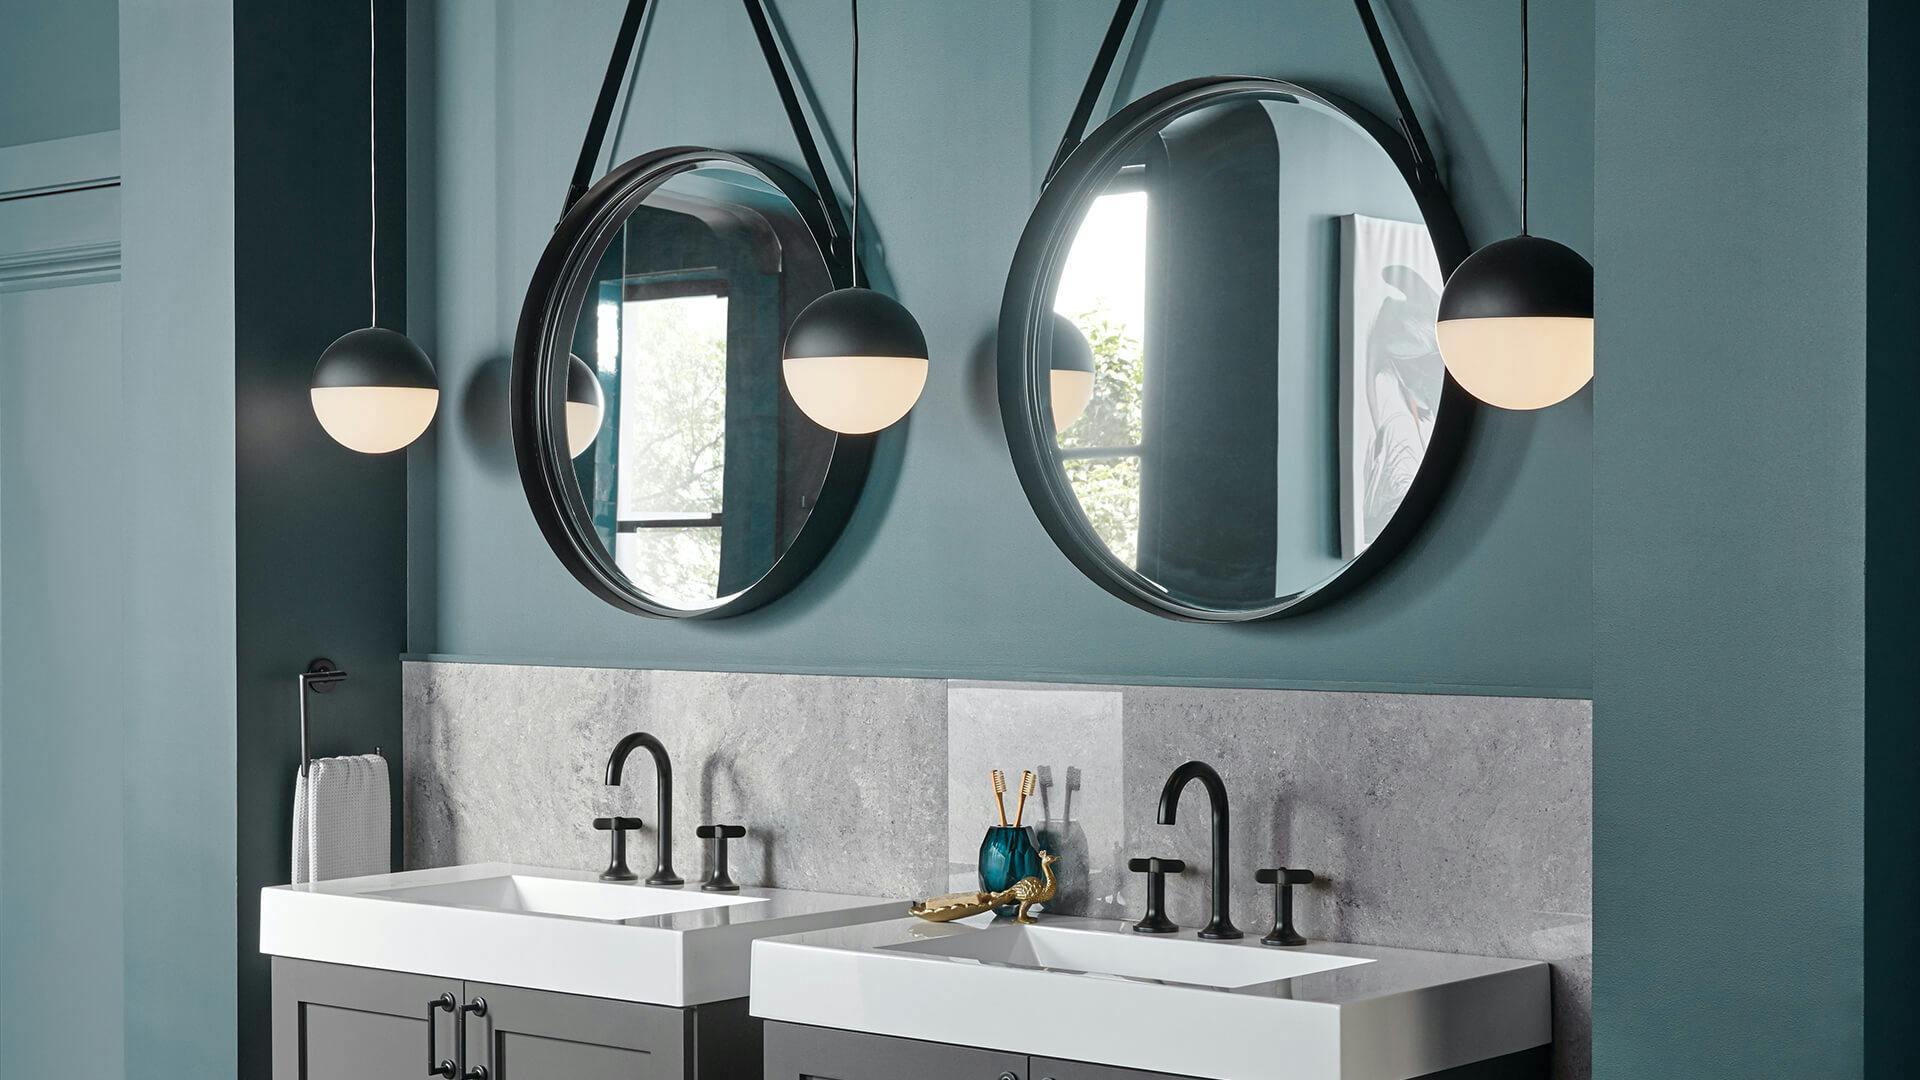 Daylit bathroom with two sinks, each with a mirror above them and a glowing Moonlit hanging light on each side